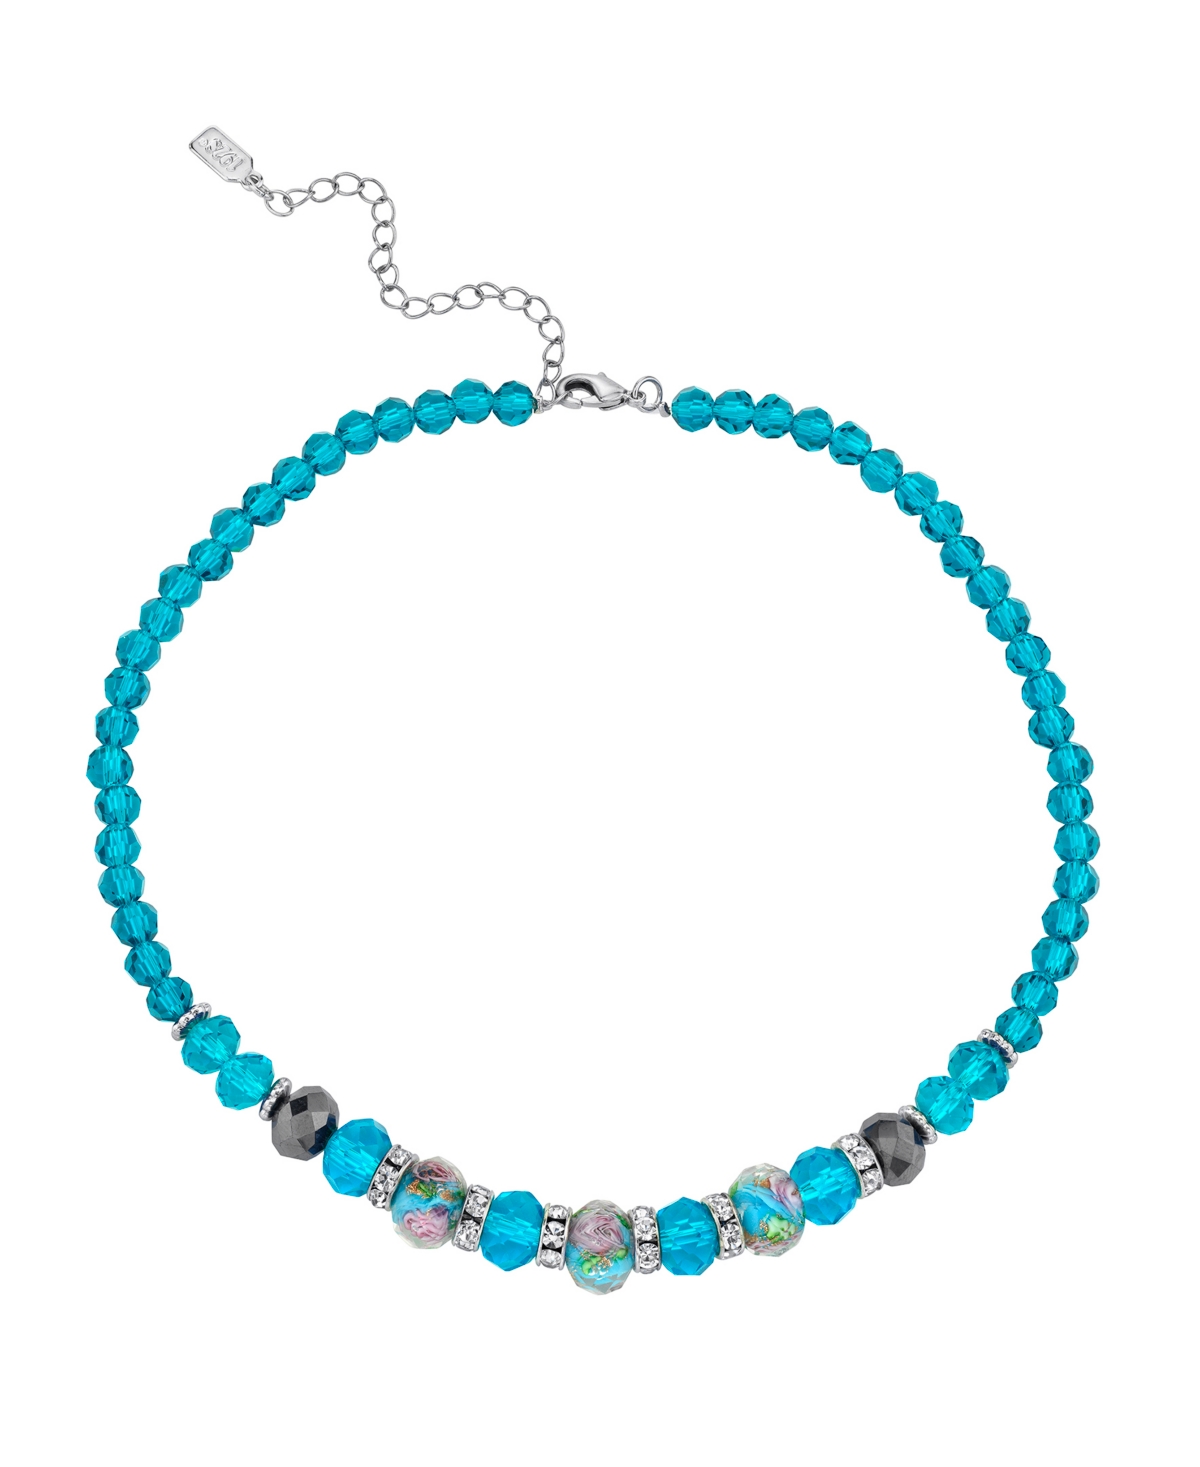 2028 Silver Tone Aqua Pink Floral Beaded Necklace 15" Adjustable In Blue